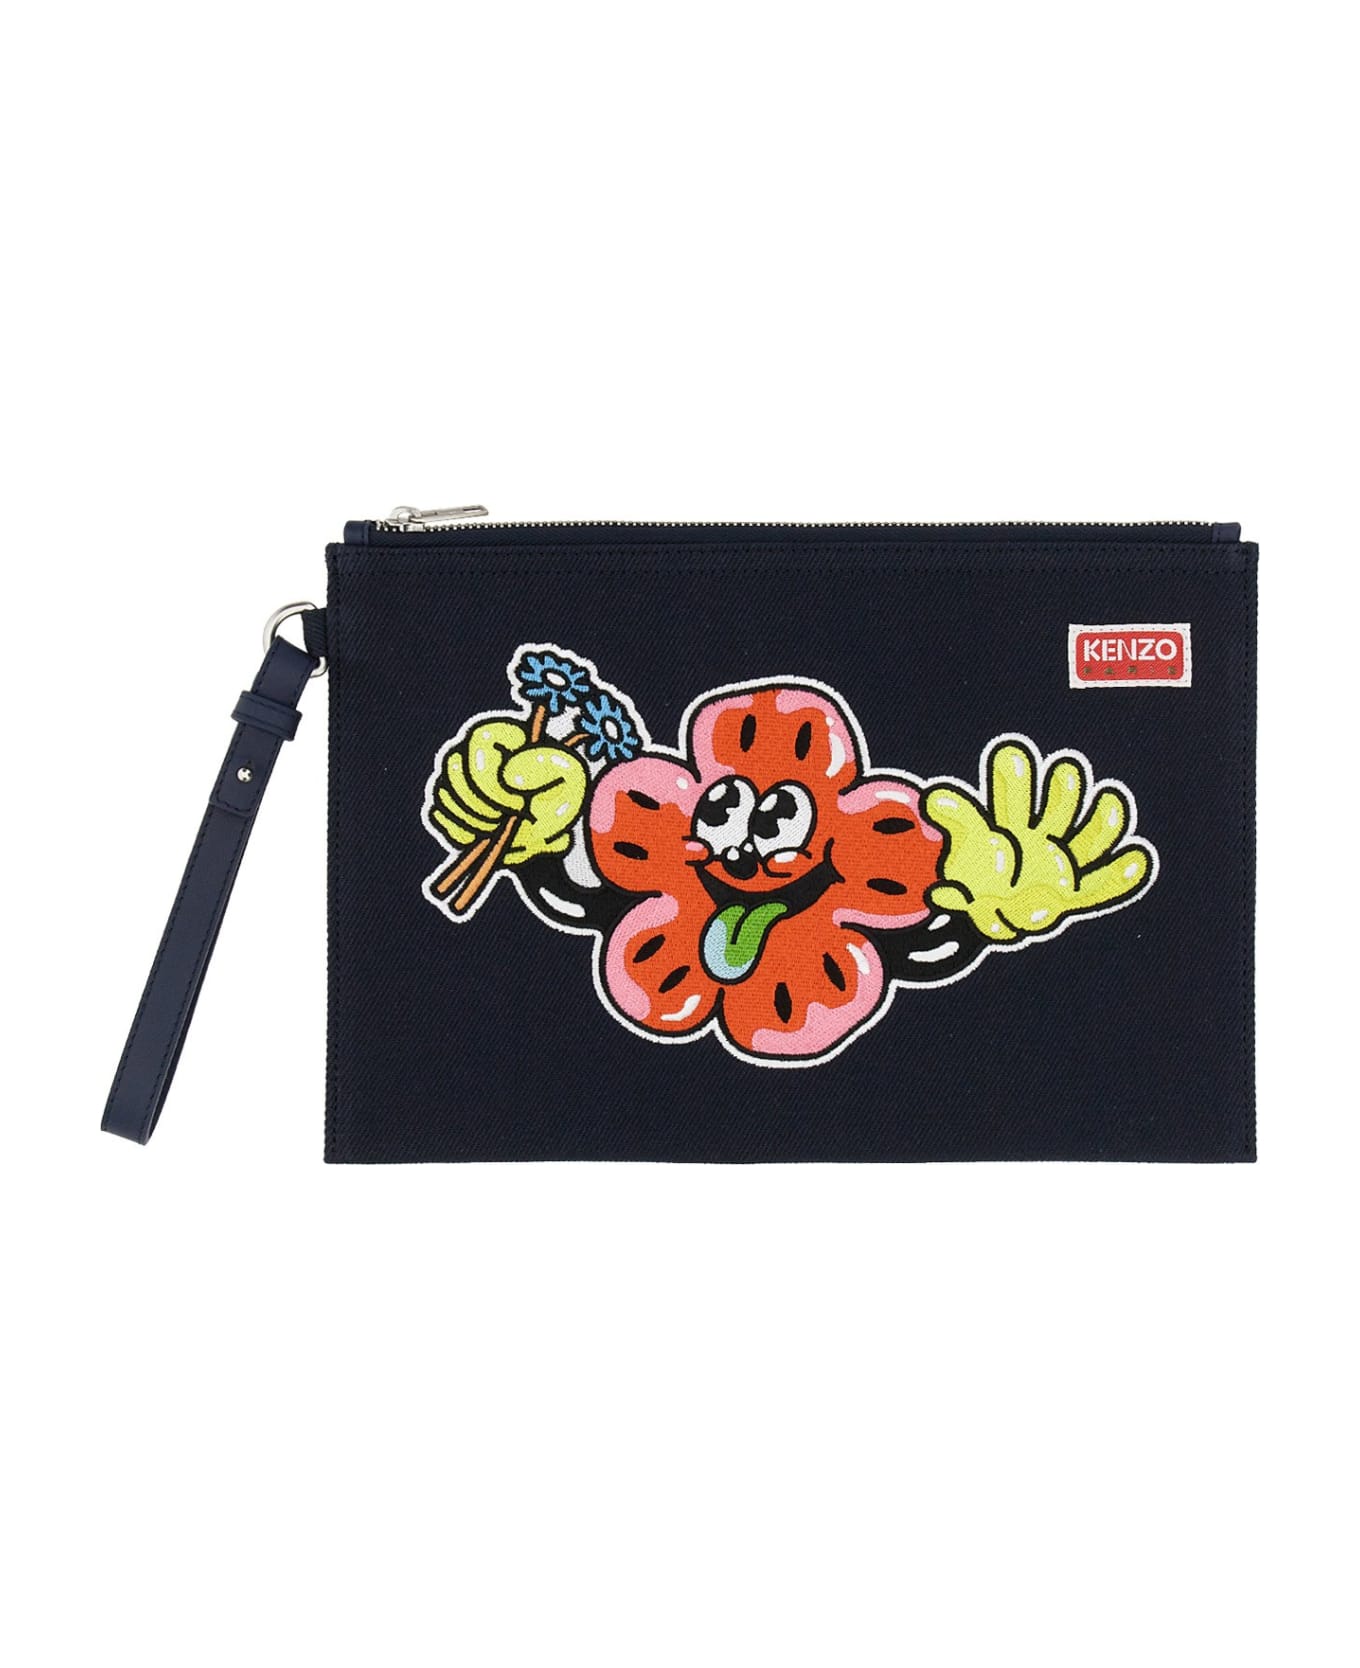 Kenzo Clutch With Embroidery - Black